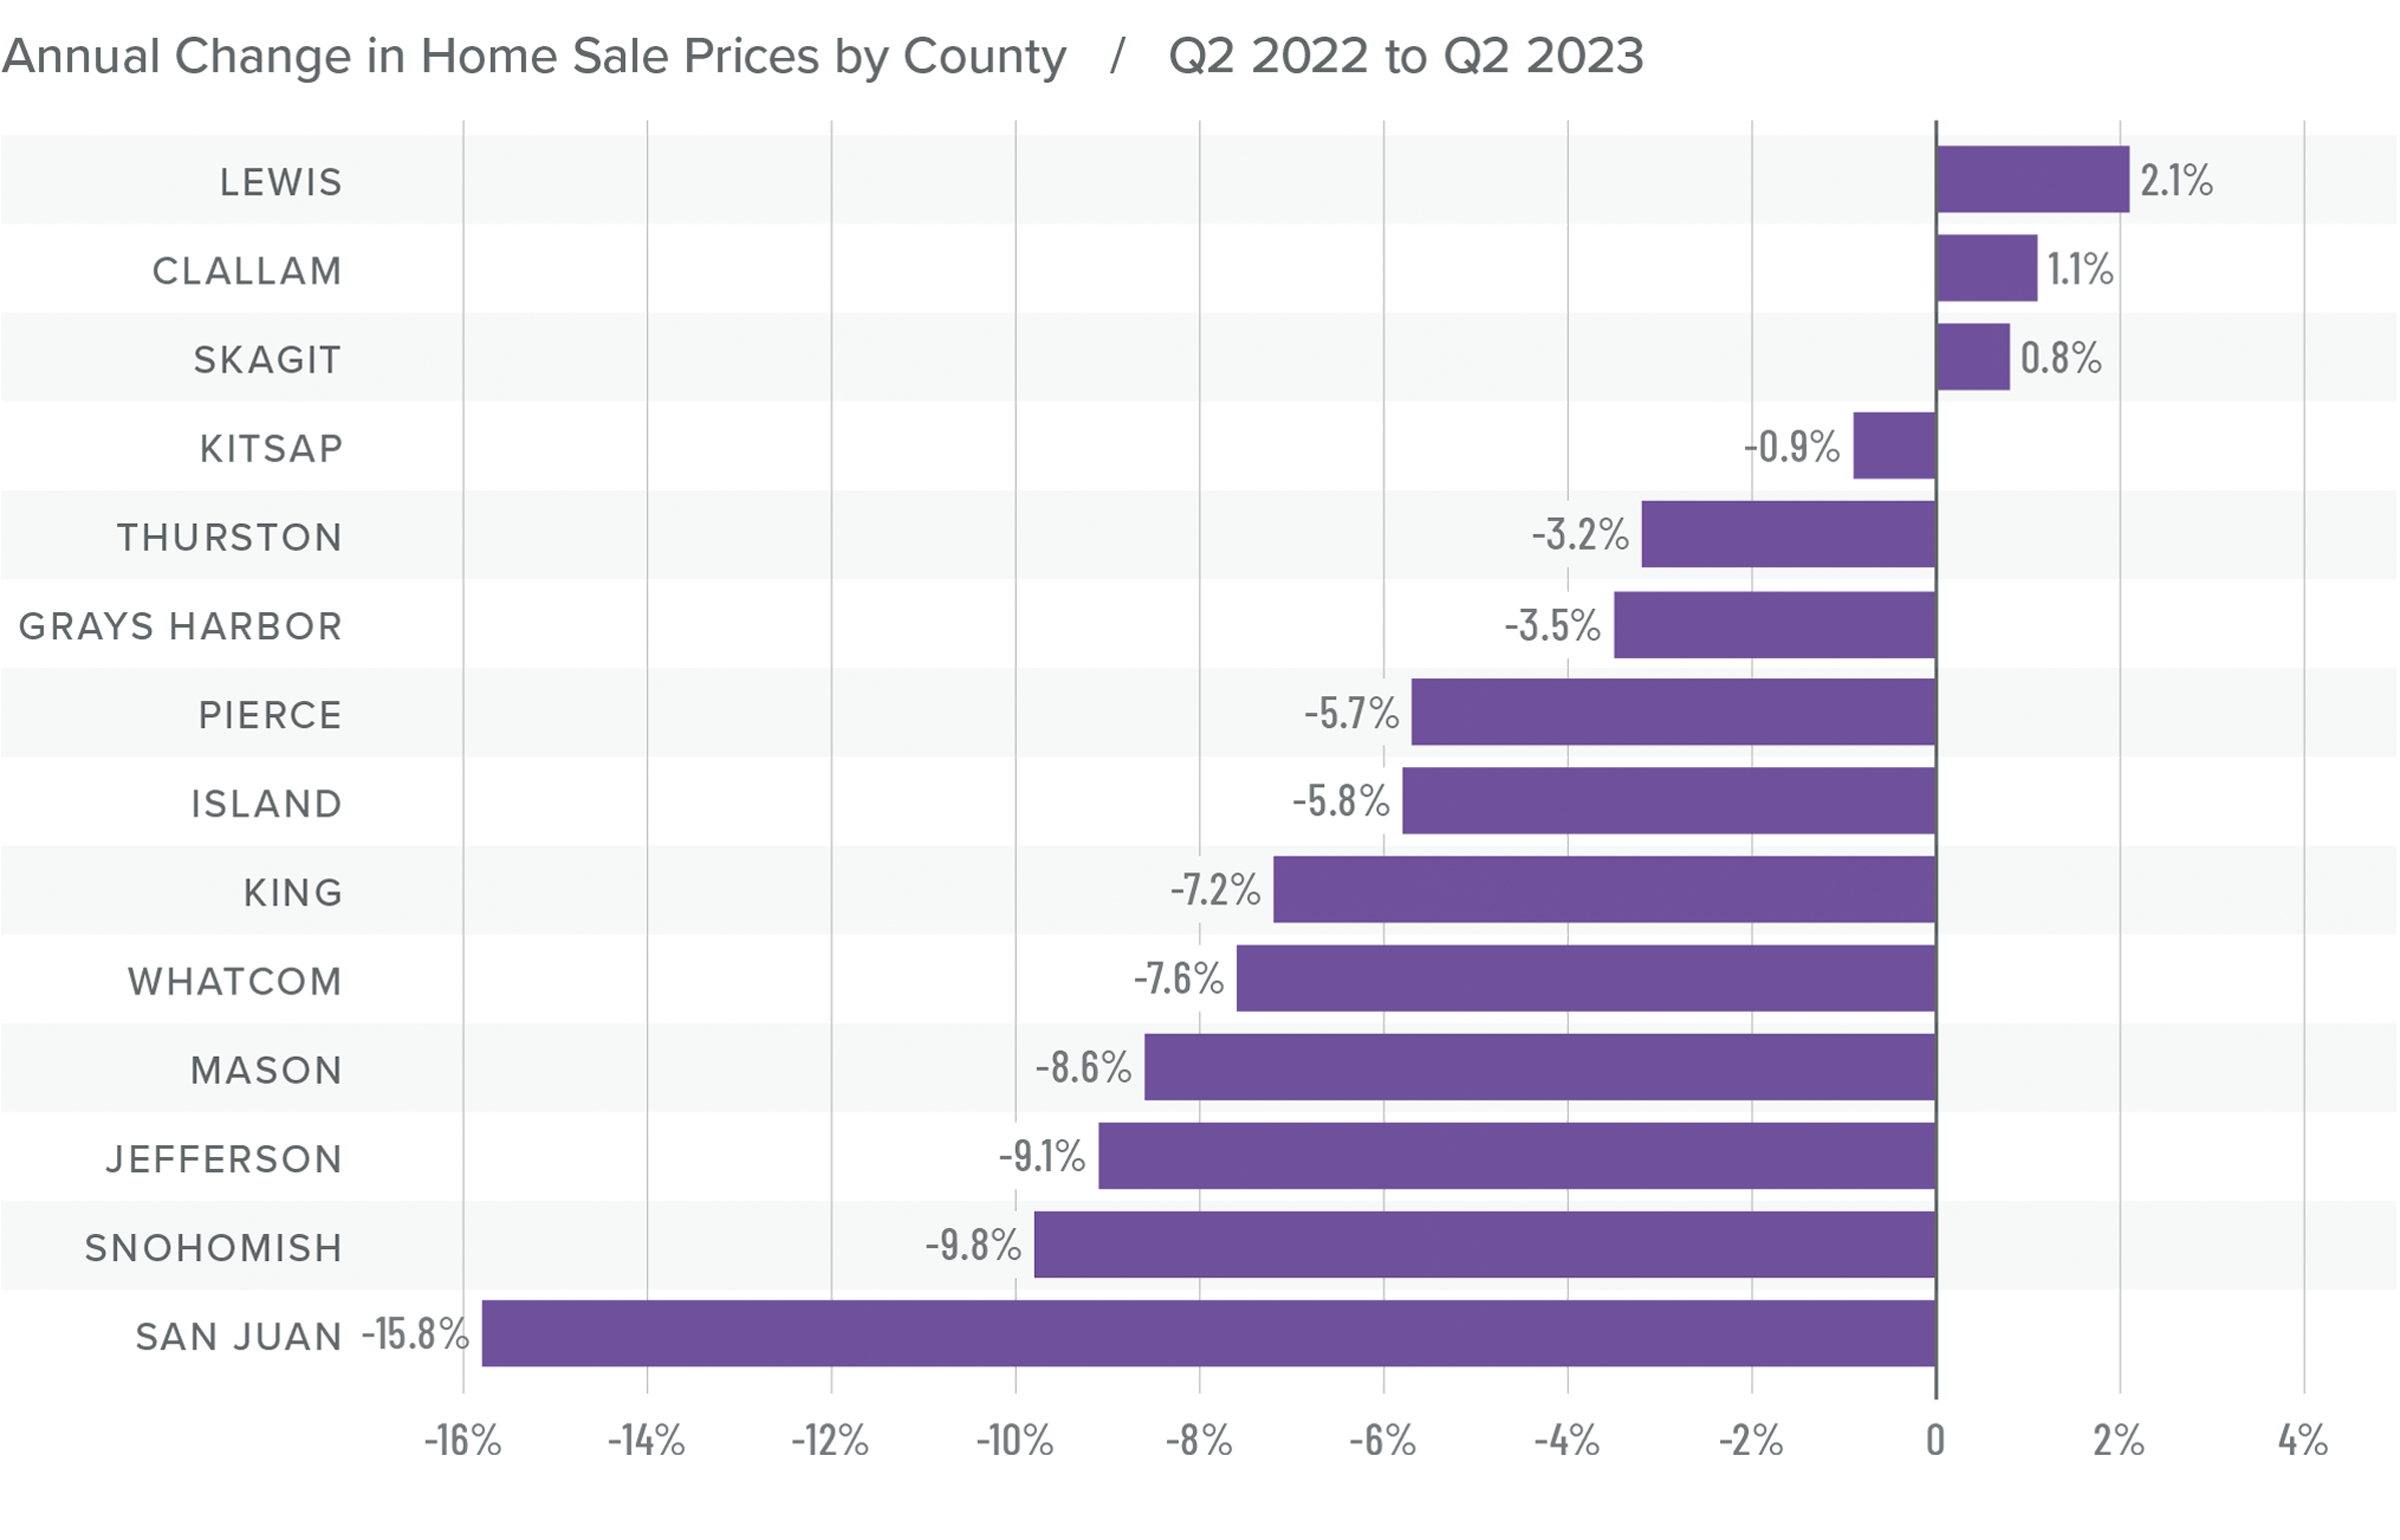 A bar graph showing the annual change in home sale prices by county in Western Washington from Q2 2022 to Q2 2023. Lewis County tops the list at 2.1%, while San Juan county had the greatest decline at -15.8%. Pierce and King County were toward the middle at around 7%, while Snohomish County had the second greatest decline at -9.8%.